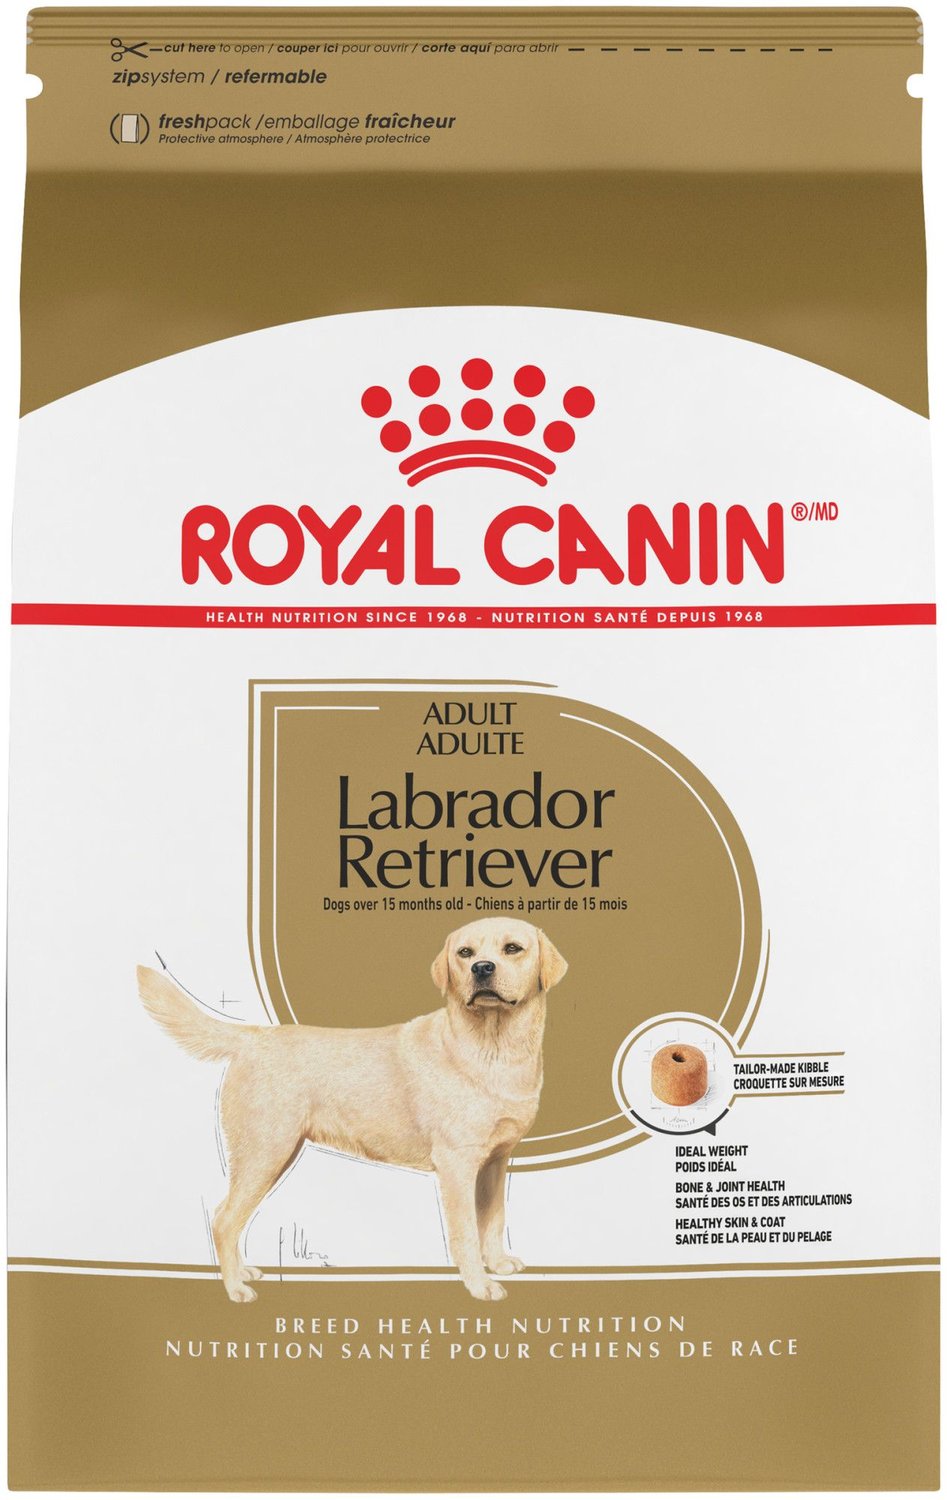 royal canin made in